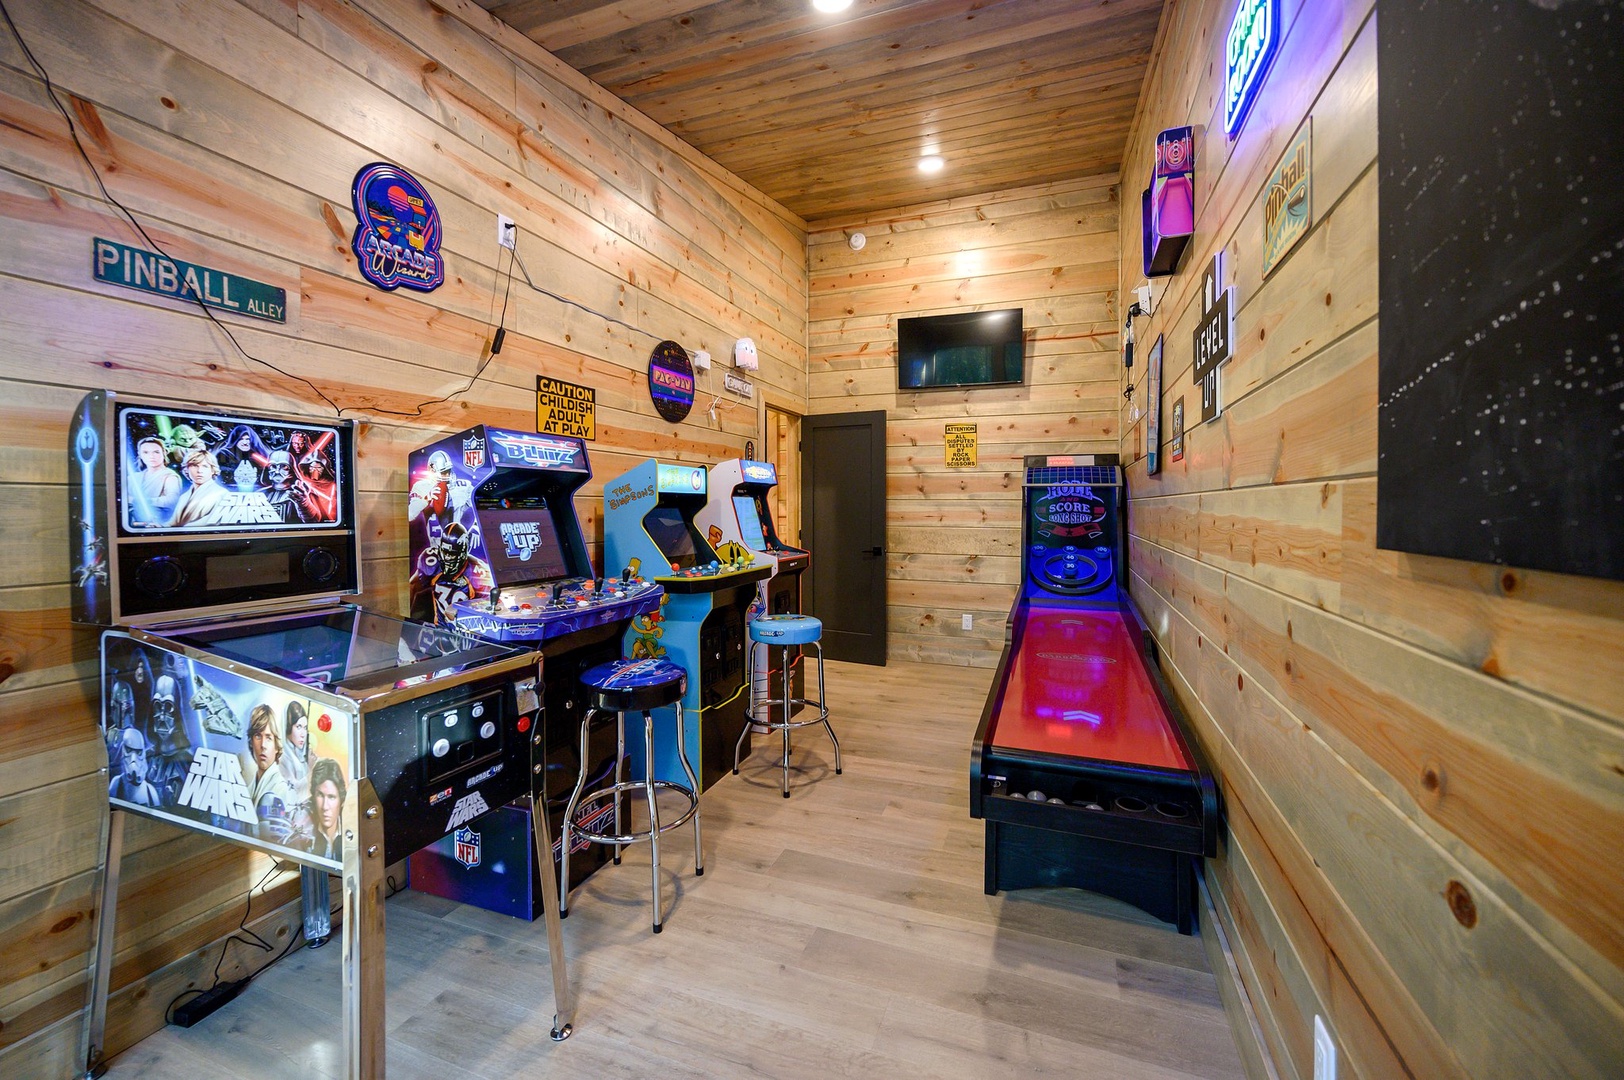 Adults and kids will love this arcade room!